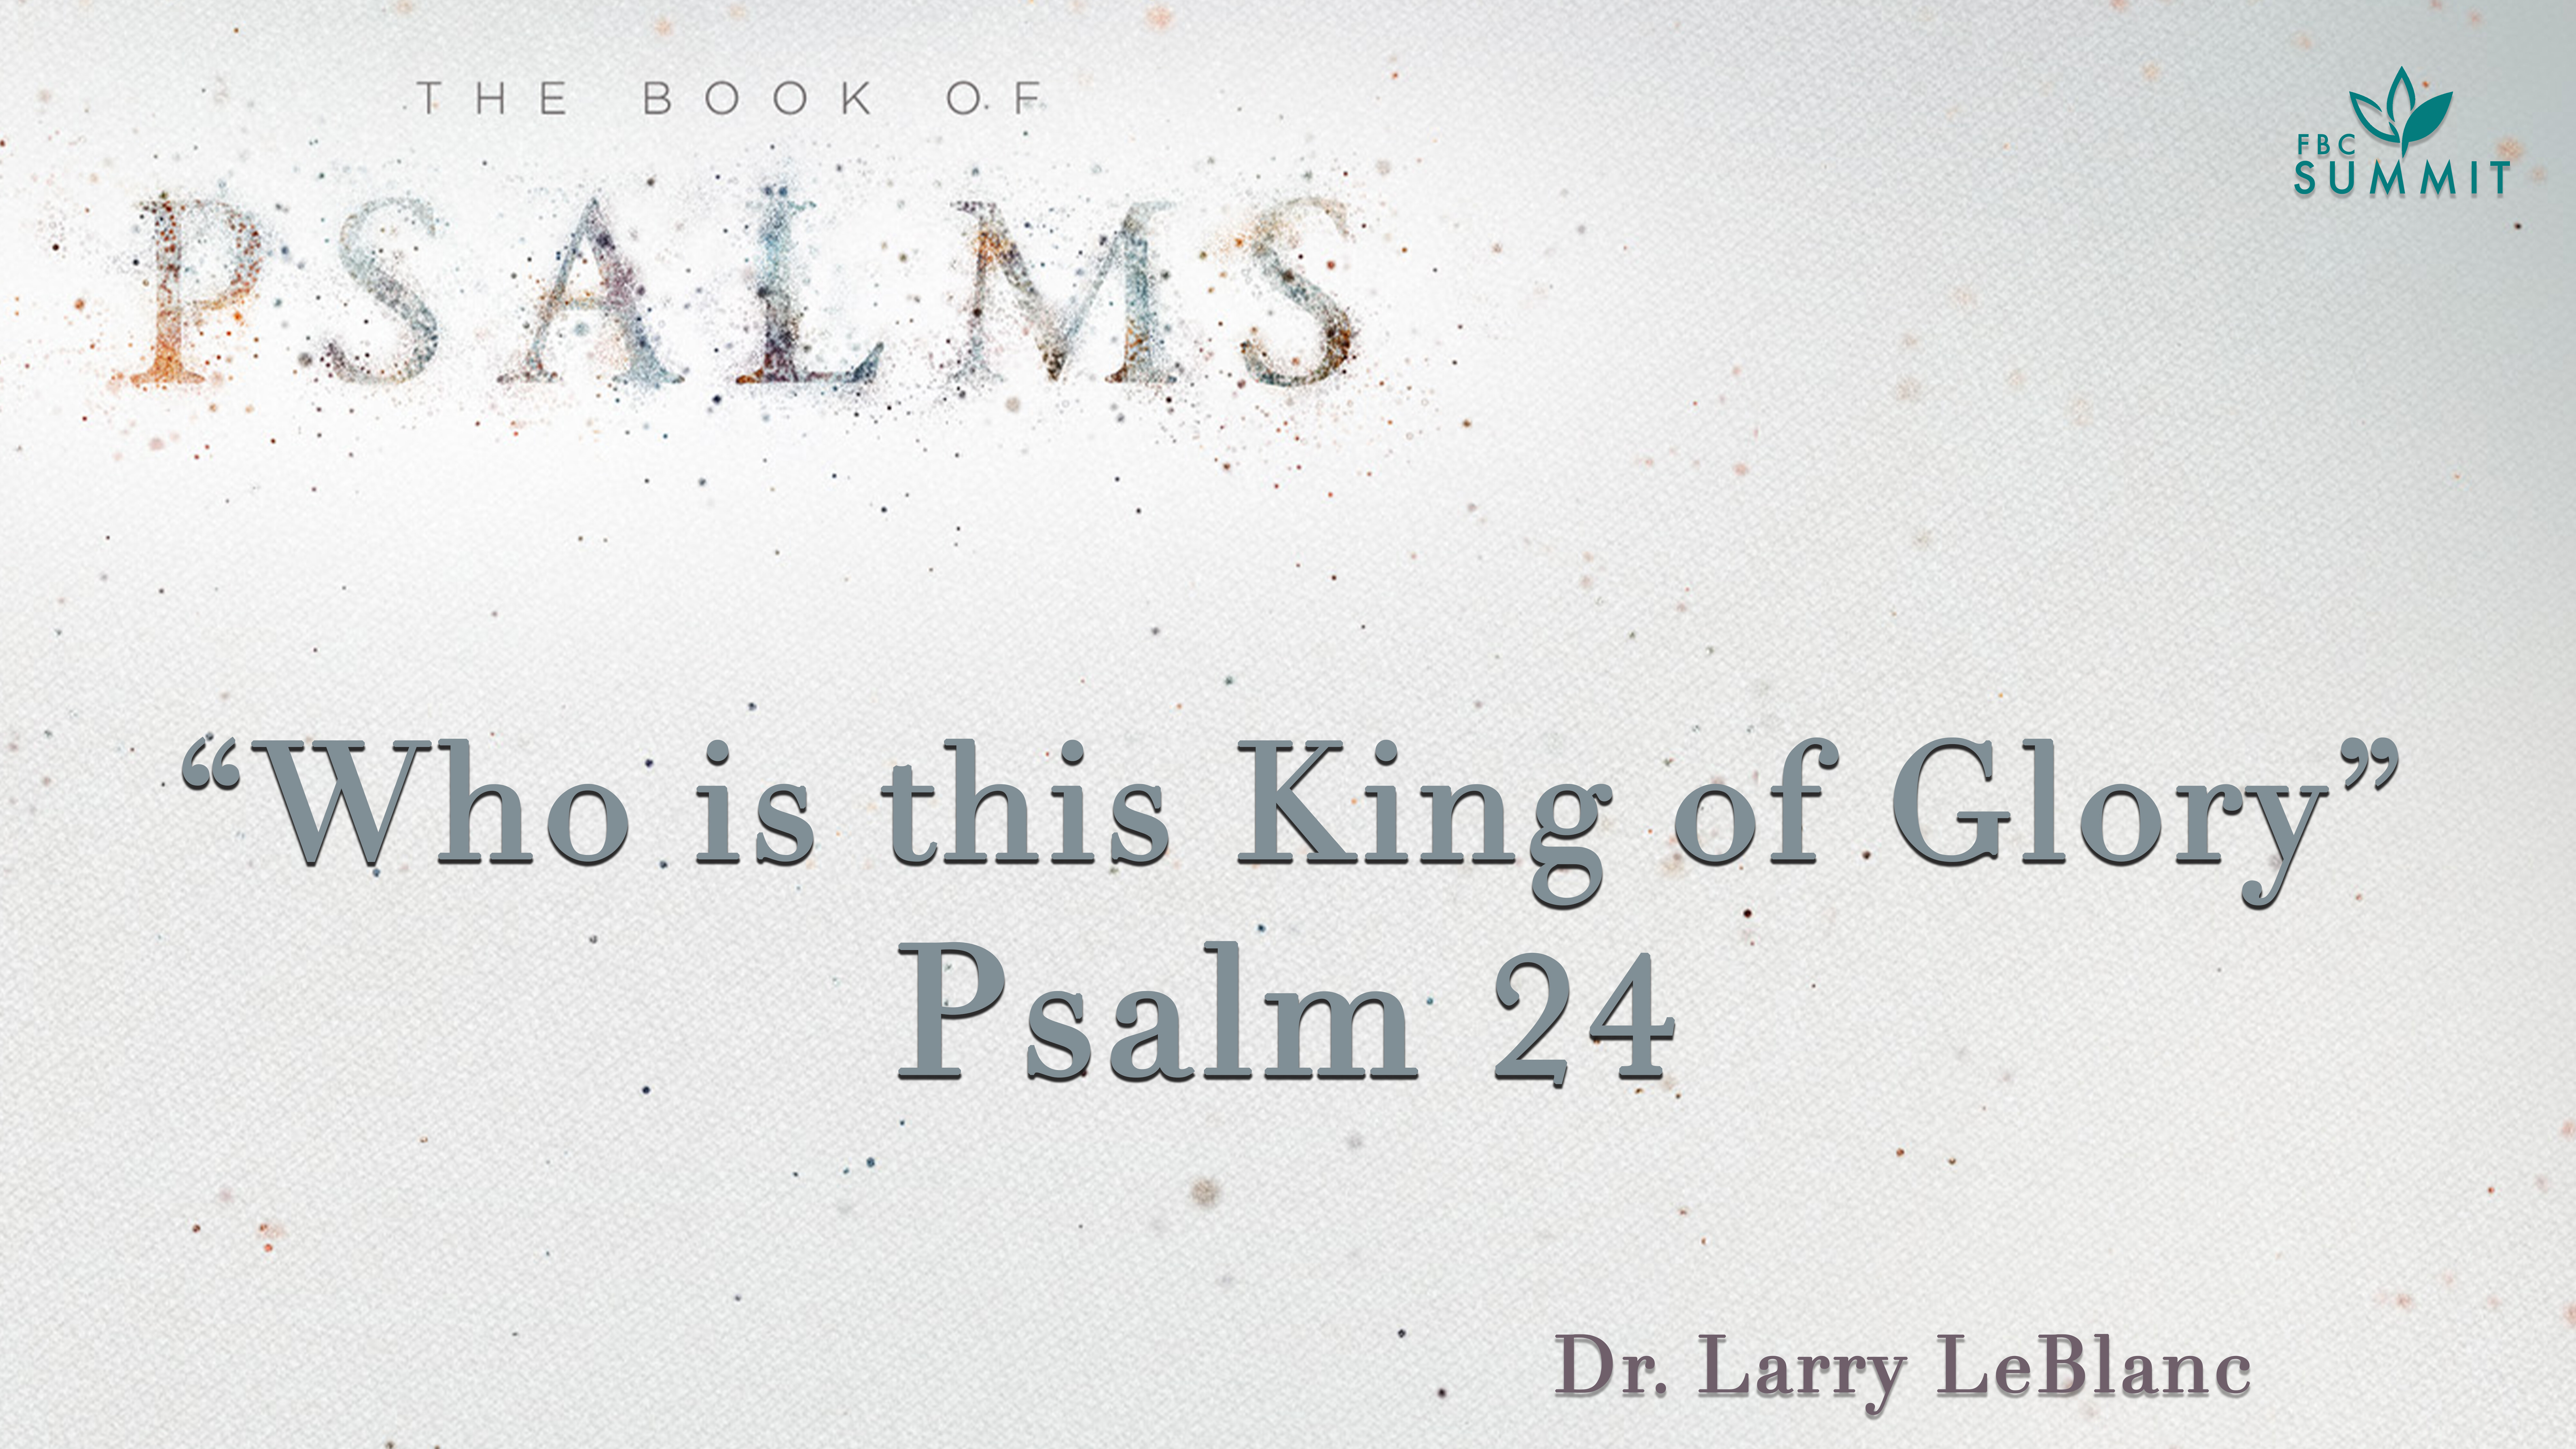 Psalm 24: Who is this King of Glory?